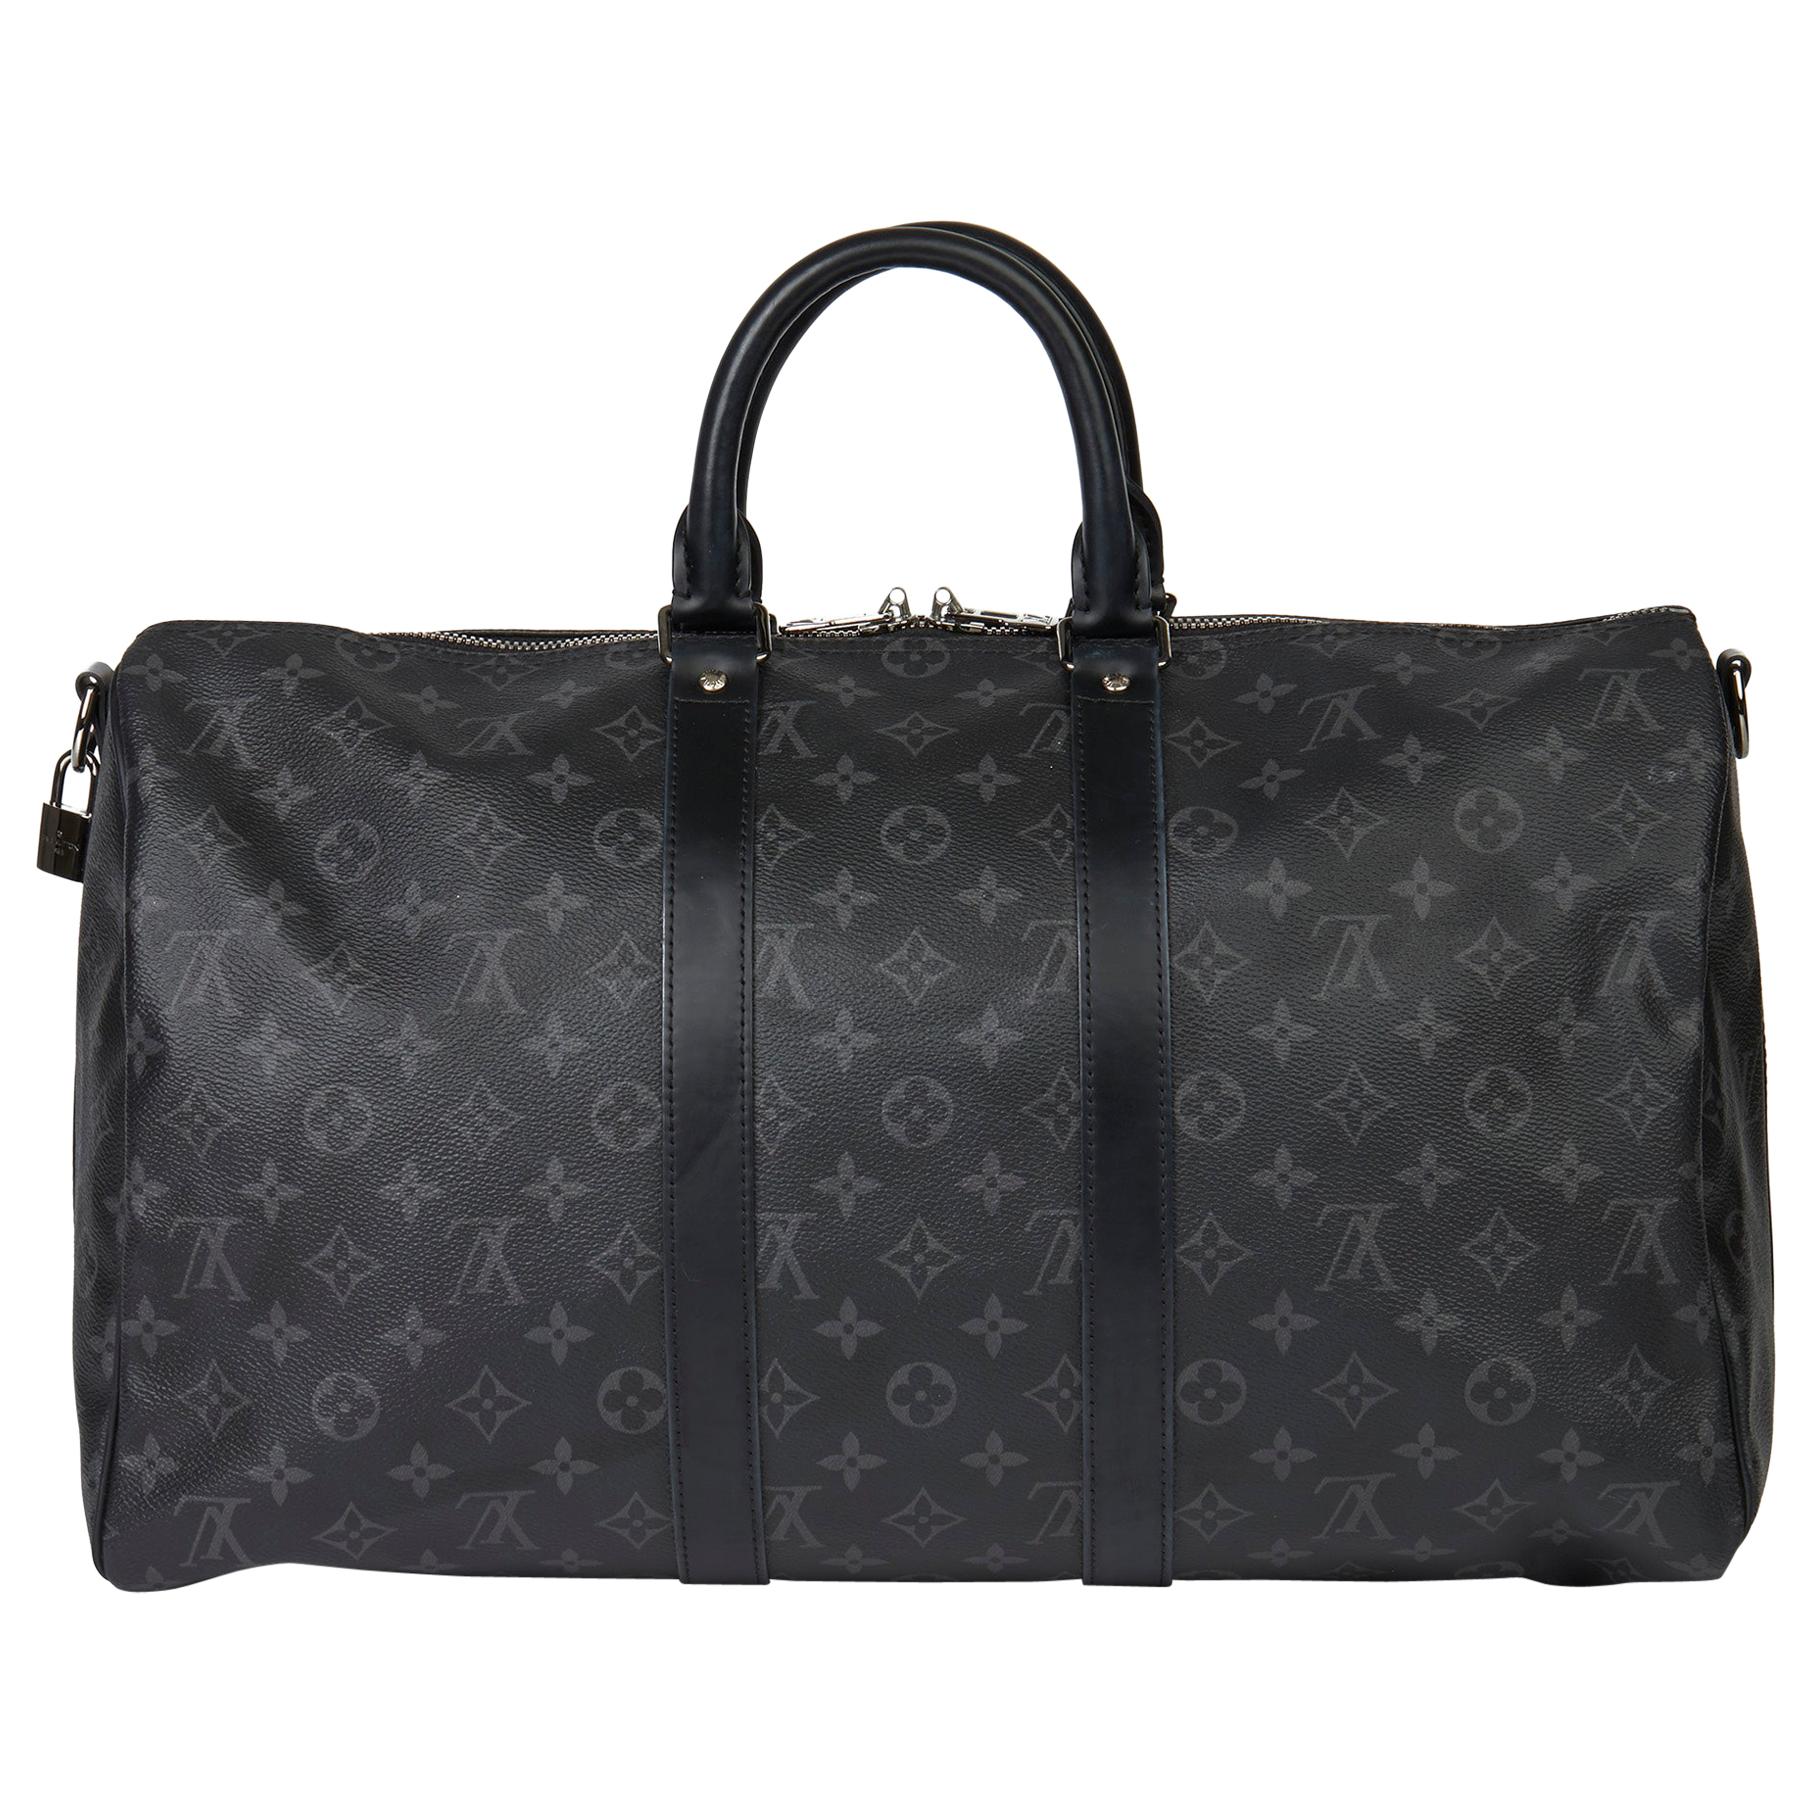 Louis Vuitton Keepall Bandouliere 45 Multicolor in Monogram Coated